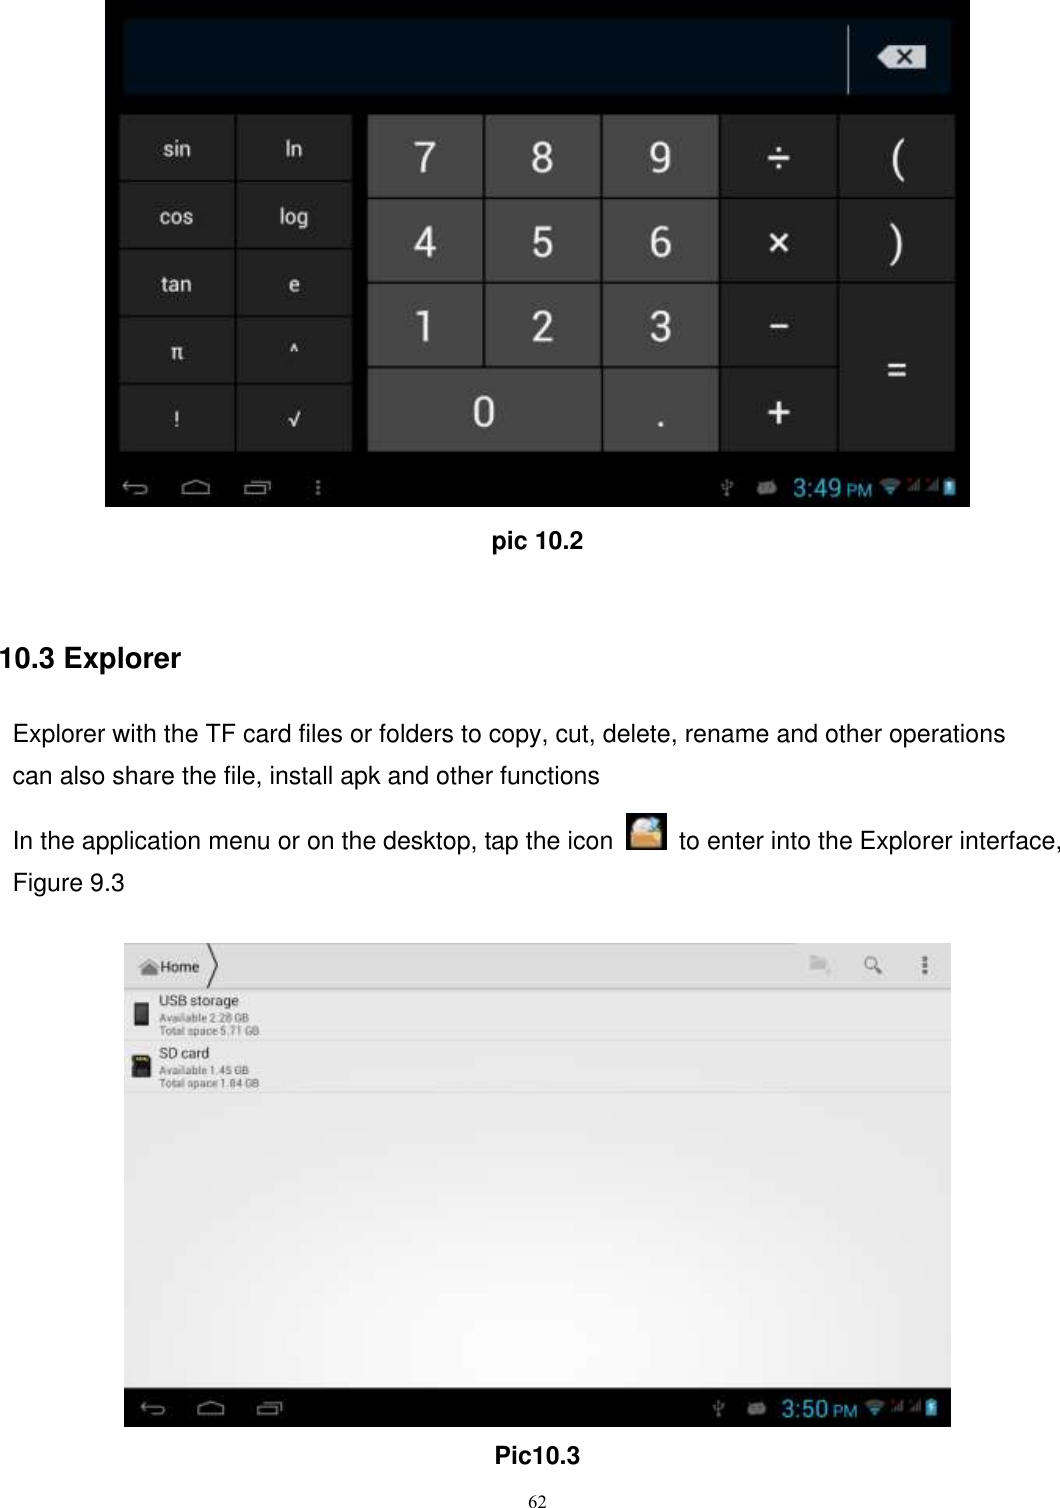      62  pic 10.2  10.3 Explorer Explorer with the TF card files or folders to copy, cut, delete, rename and other operations can also share the file, install apk and other functions In the application menu or on the desktop, tap the icon    to enter into the Explorer interface, Figure 9.3   Pic10.3 